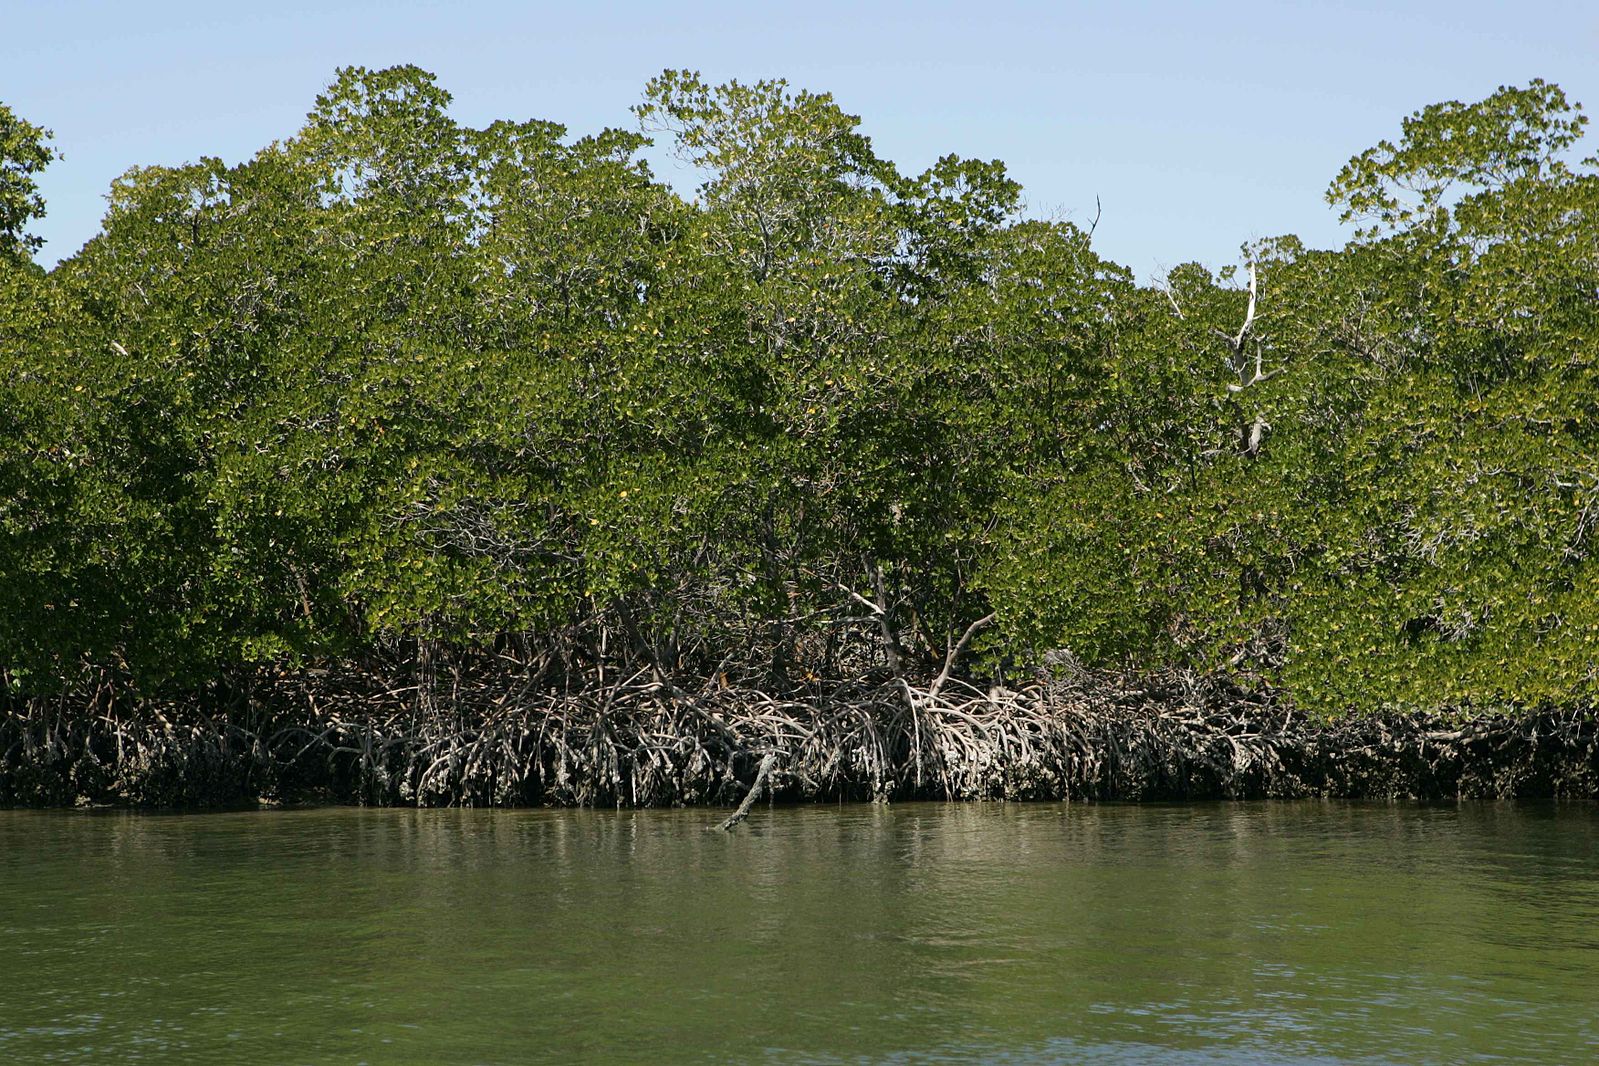 A stand of red mangrove trees.